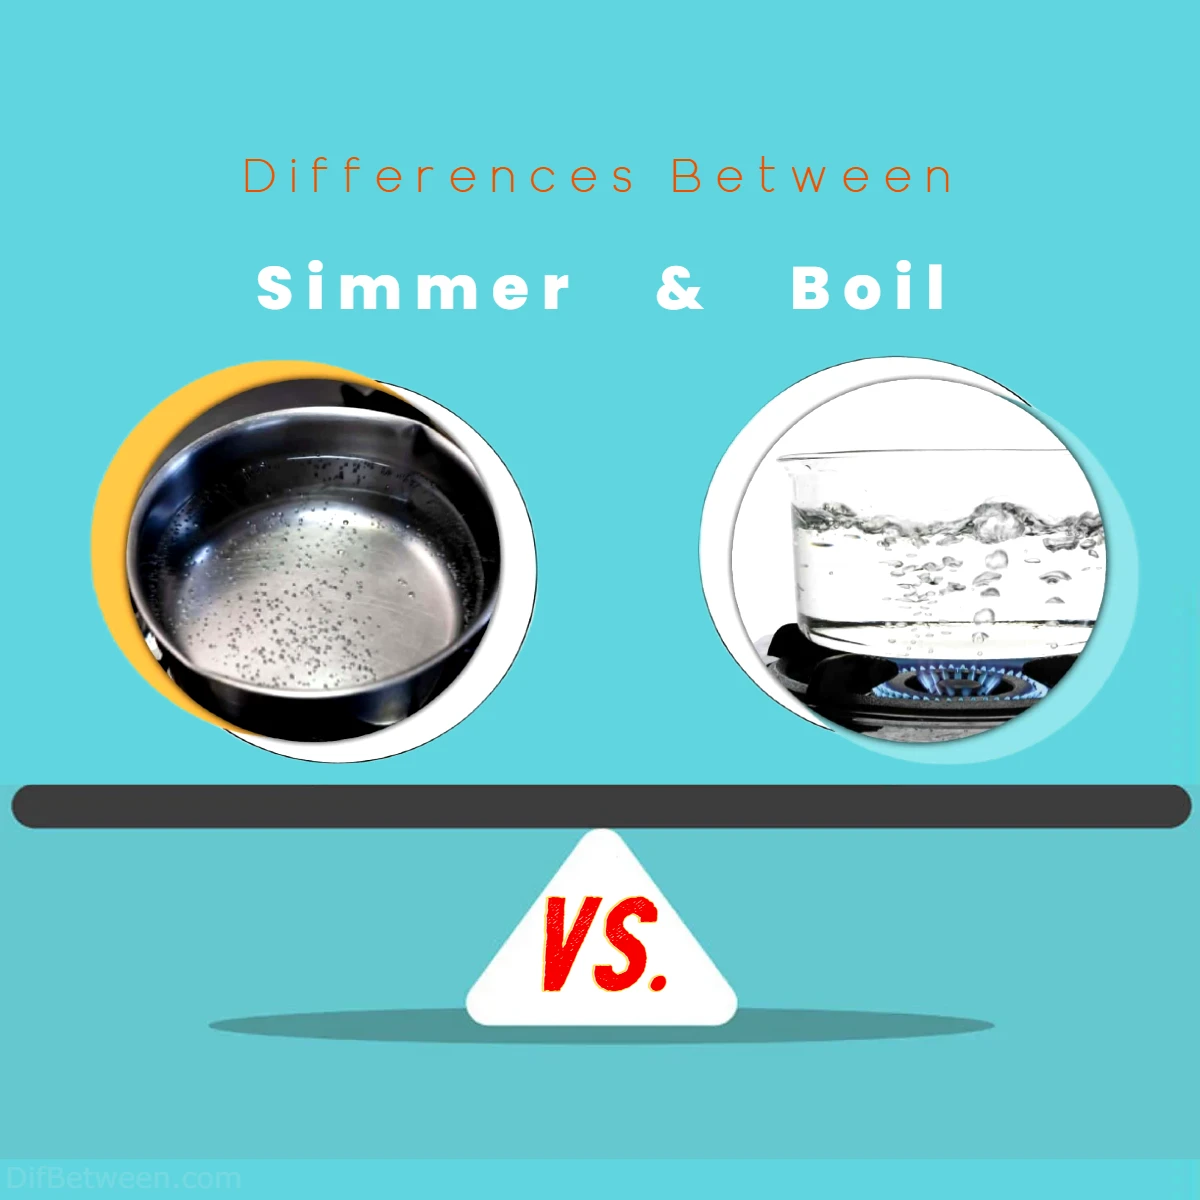 Differences Between Simmer vs Boil